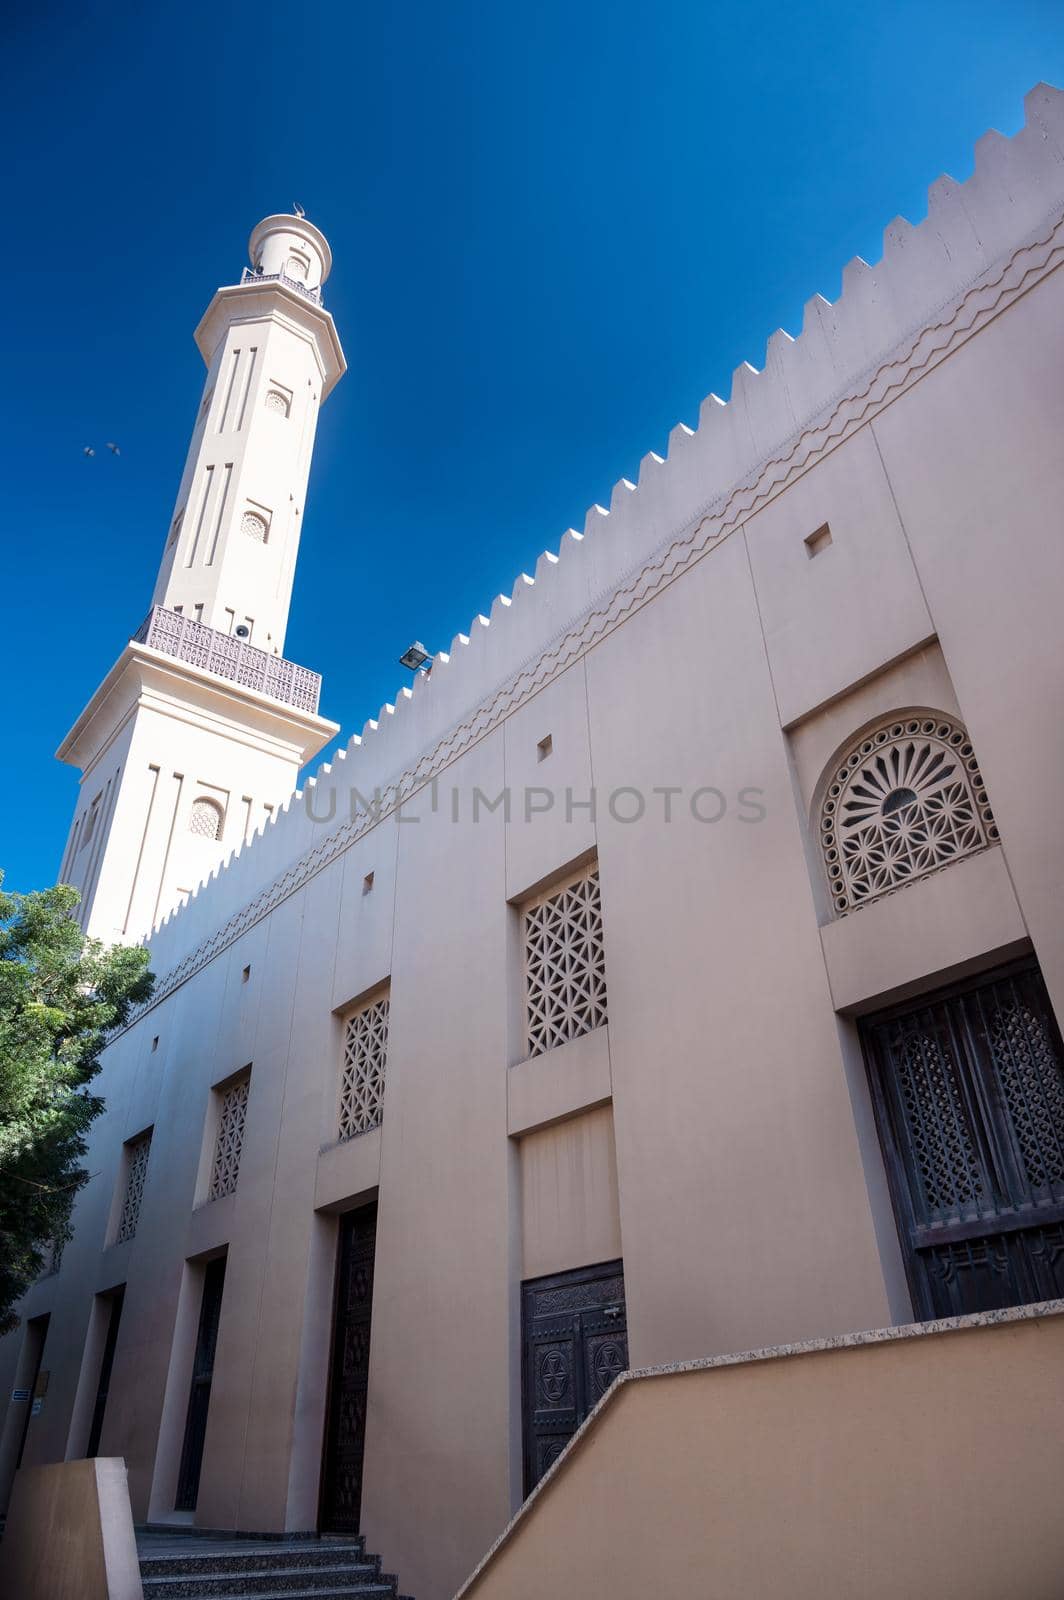 Feb 27th, 2021, Bur Dubai, UAE. View of the old Grand Mosque with beautiful minarets and wooden door captured at Bur Dubai, UAE. by sriyapixels